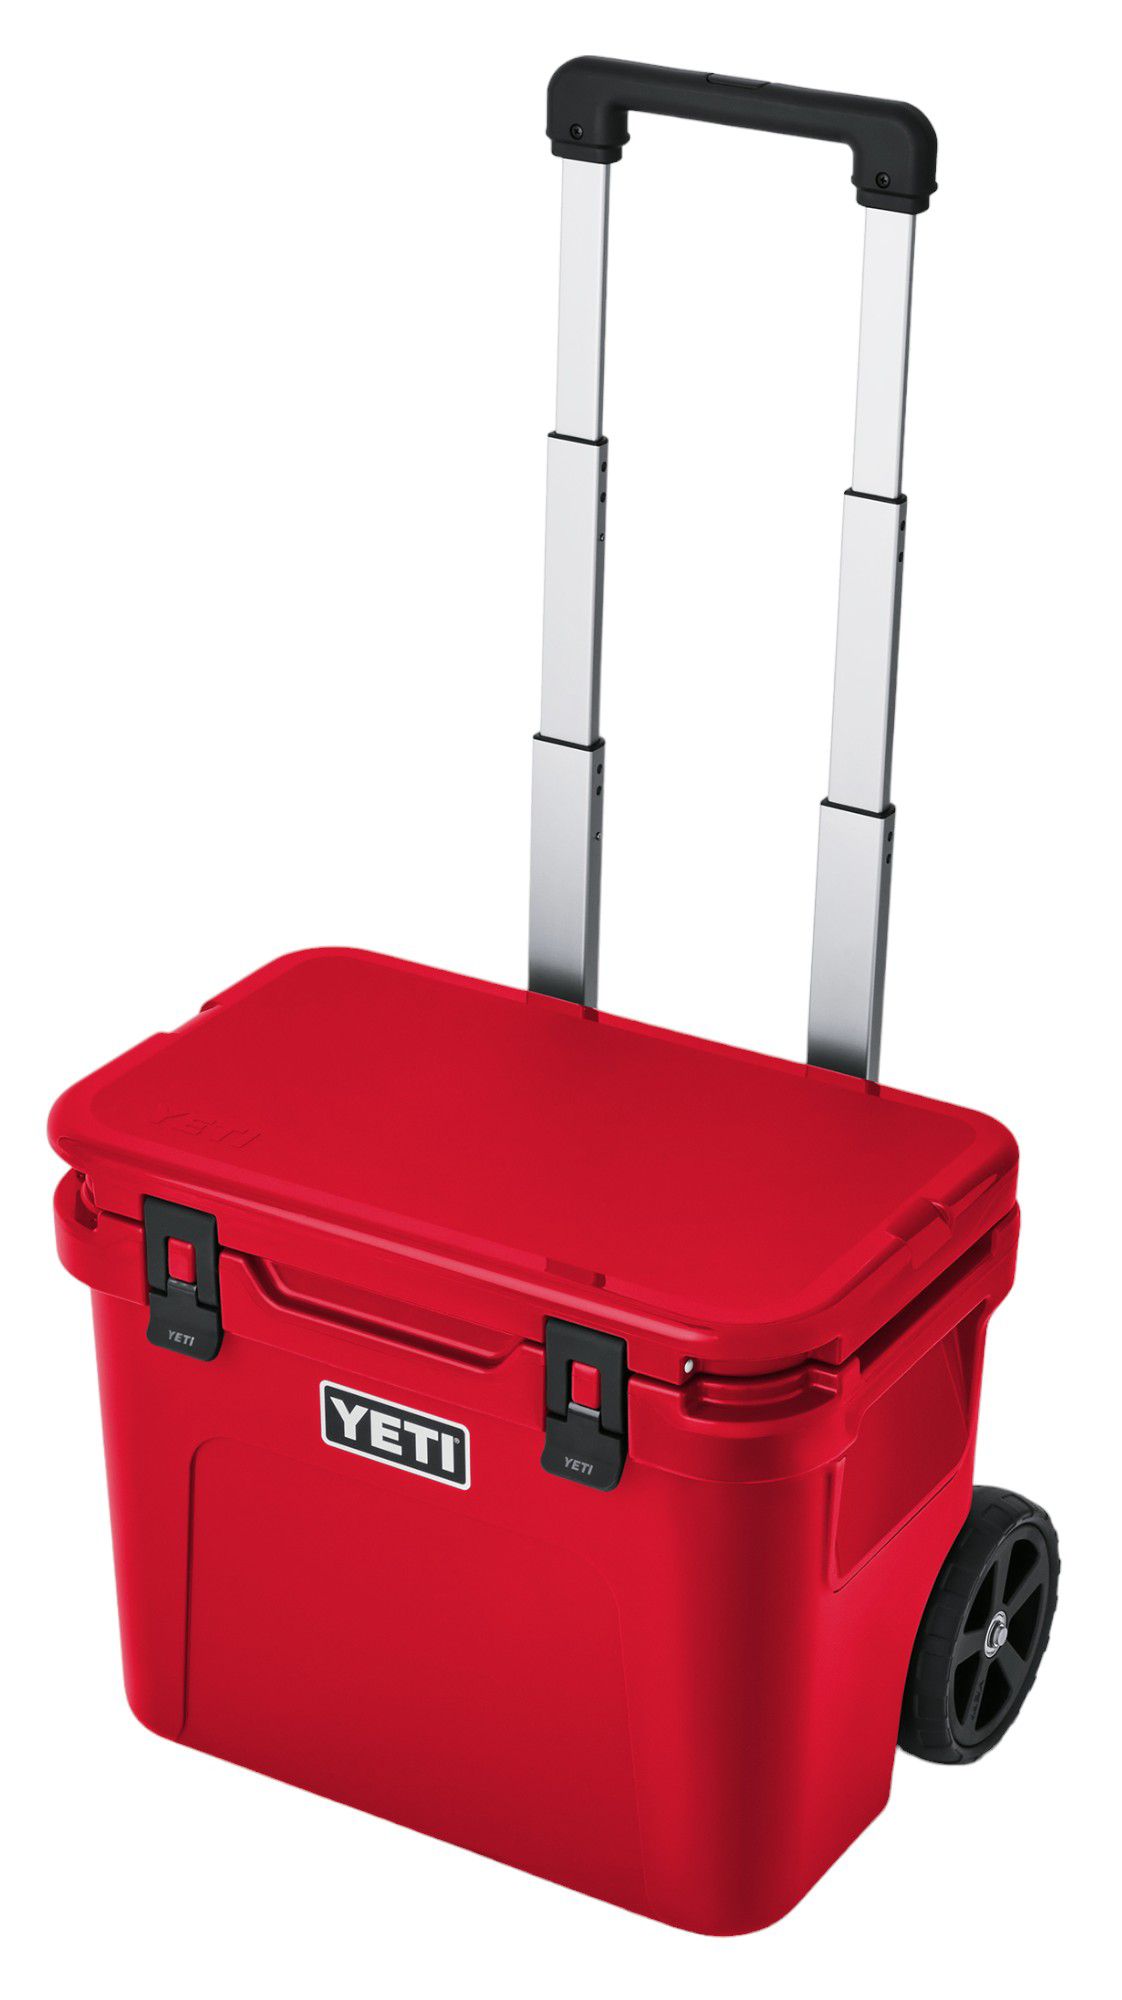 Photos - Cooler Bag Yeti Roadie 32 Wheeled Cooler, Rescue Red 24YETURD32RLLNGCLREC 